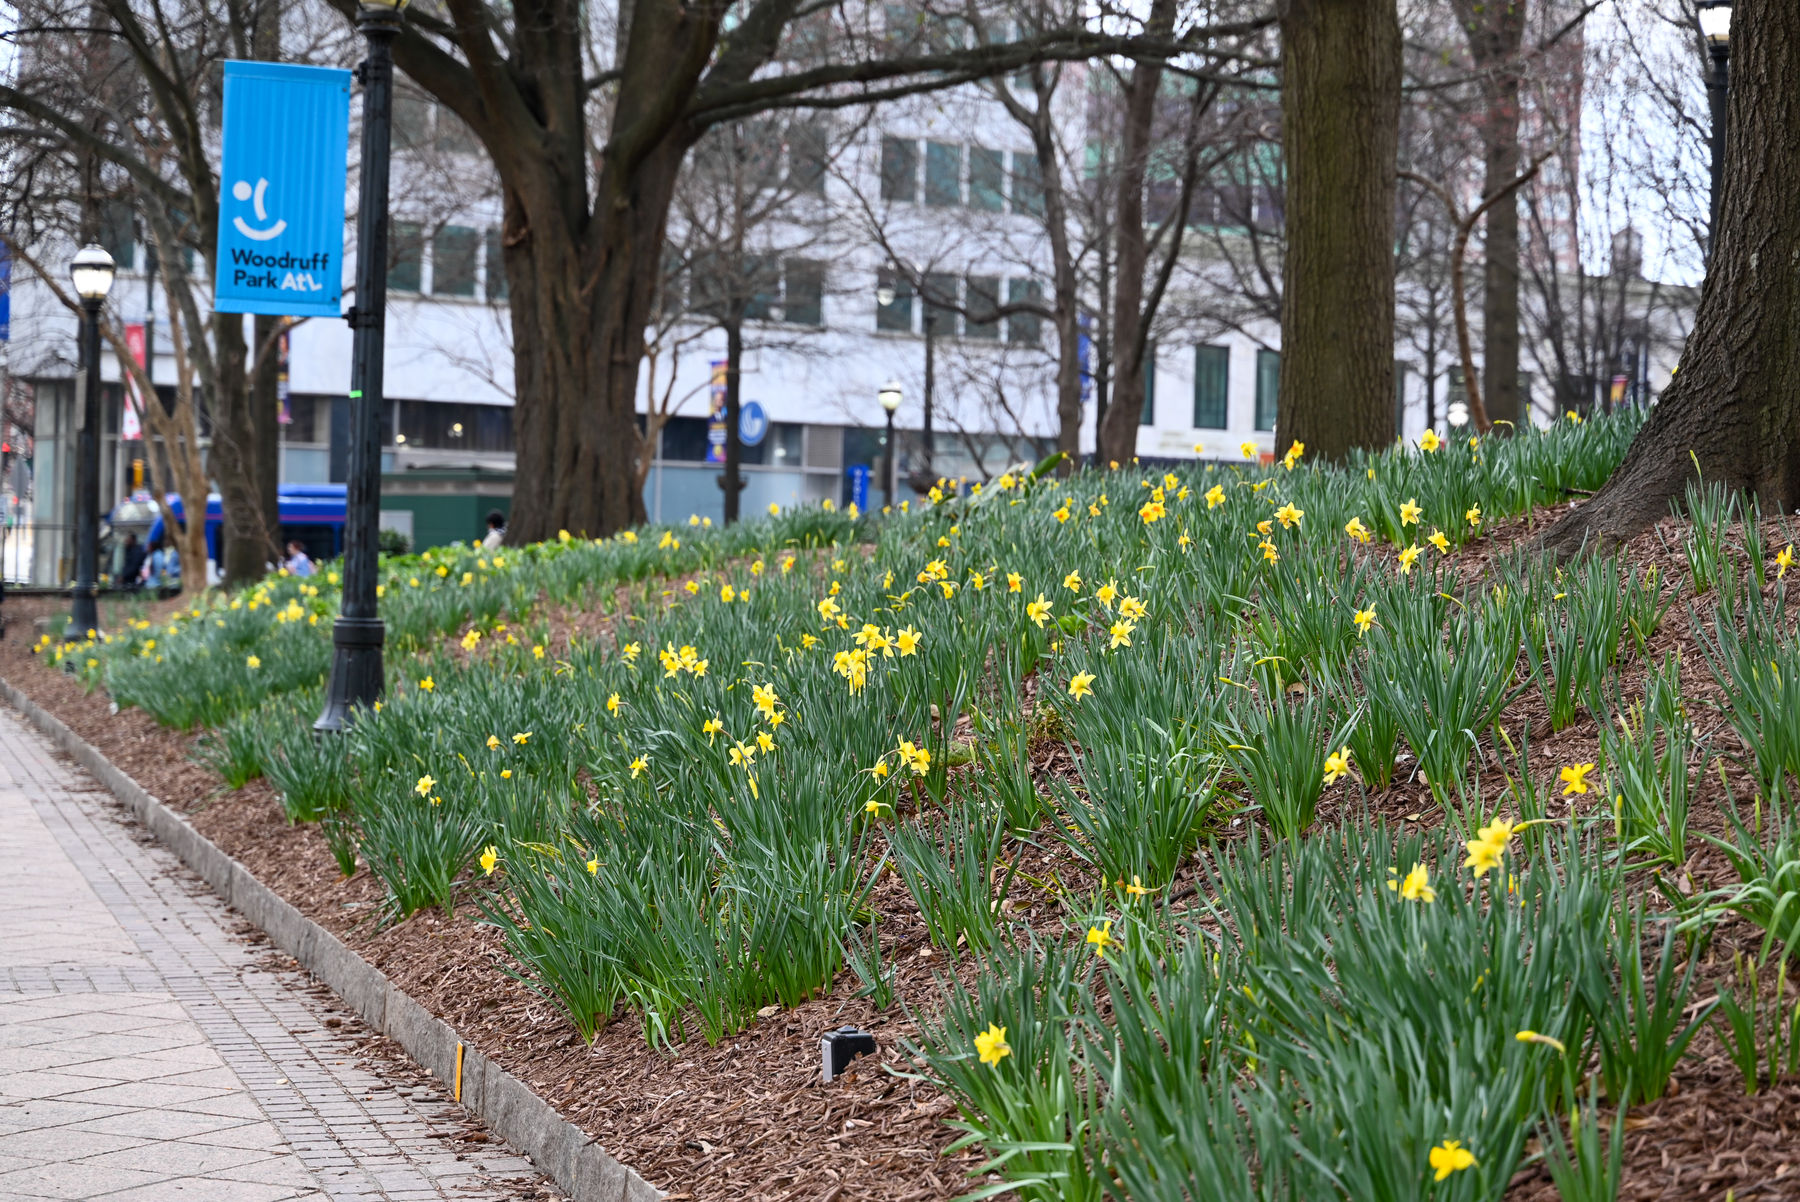 daffodil plants in bloom with bright yellow flowers in woodruff park in downtown atlanta